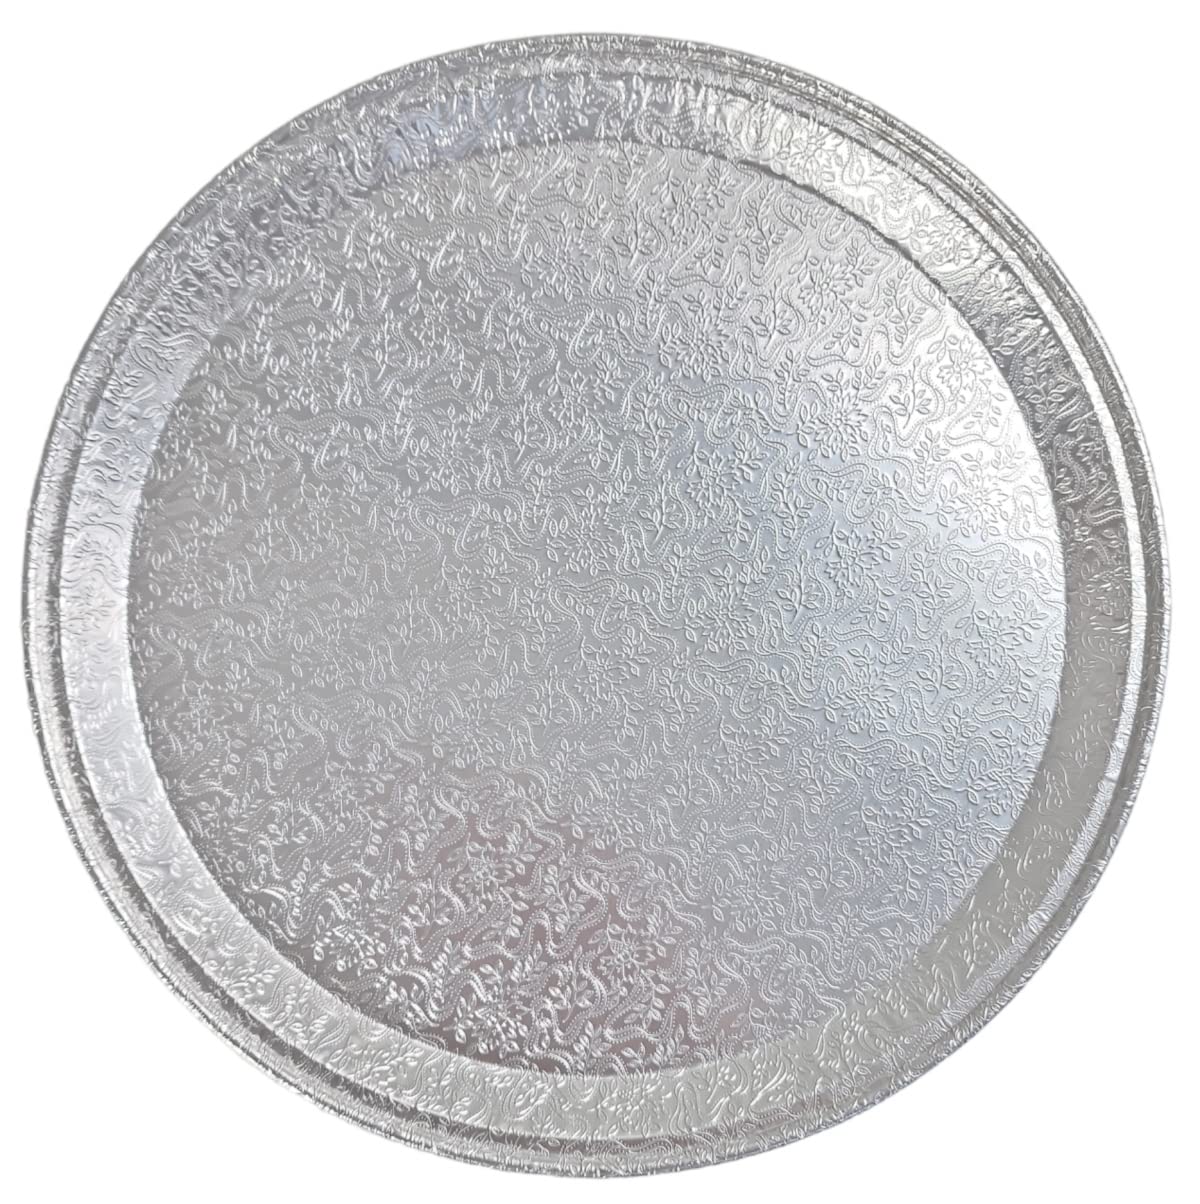 Handi-Foil 12" Flat Aluminum Foil Cater Serving Tray - Round Catering Platter (Trays ONLY - NO LIDS) Pack of 12